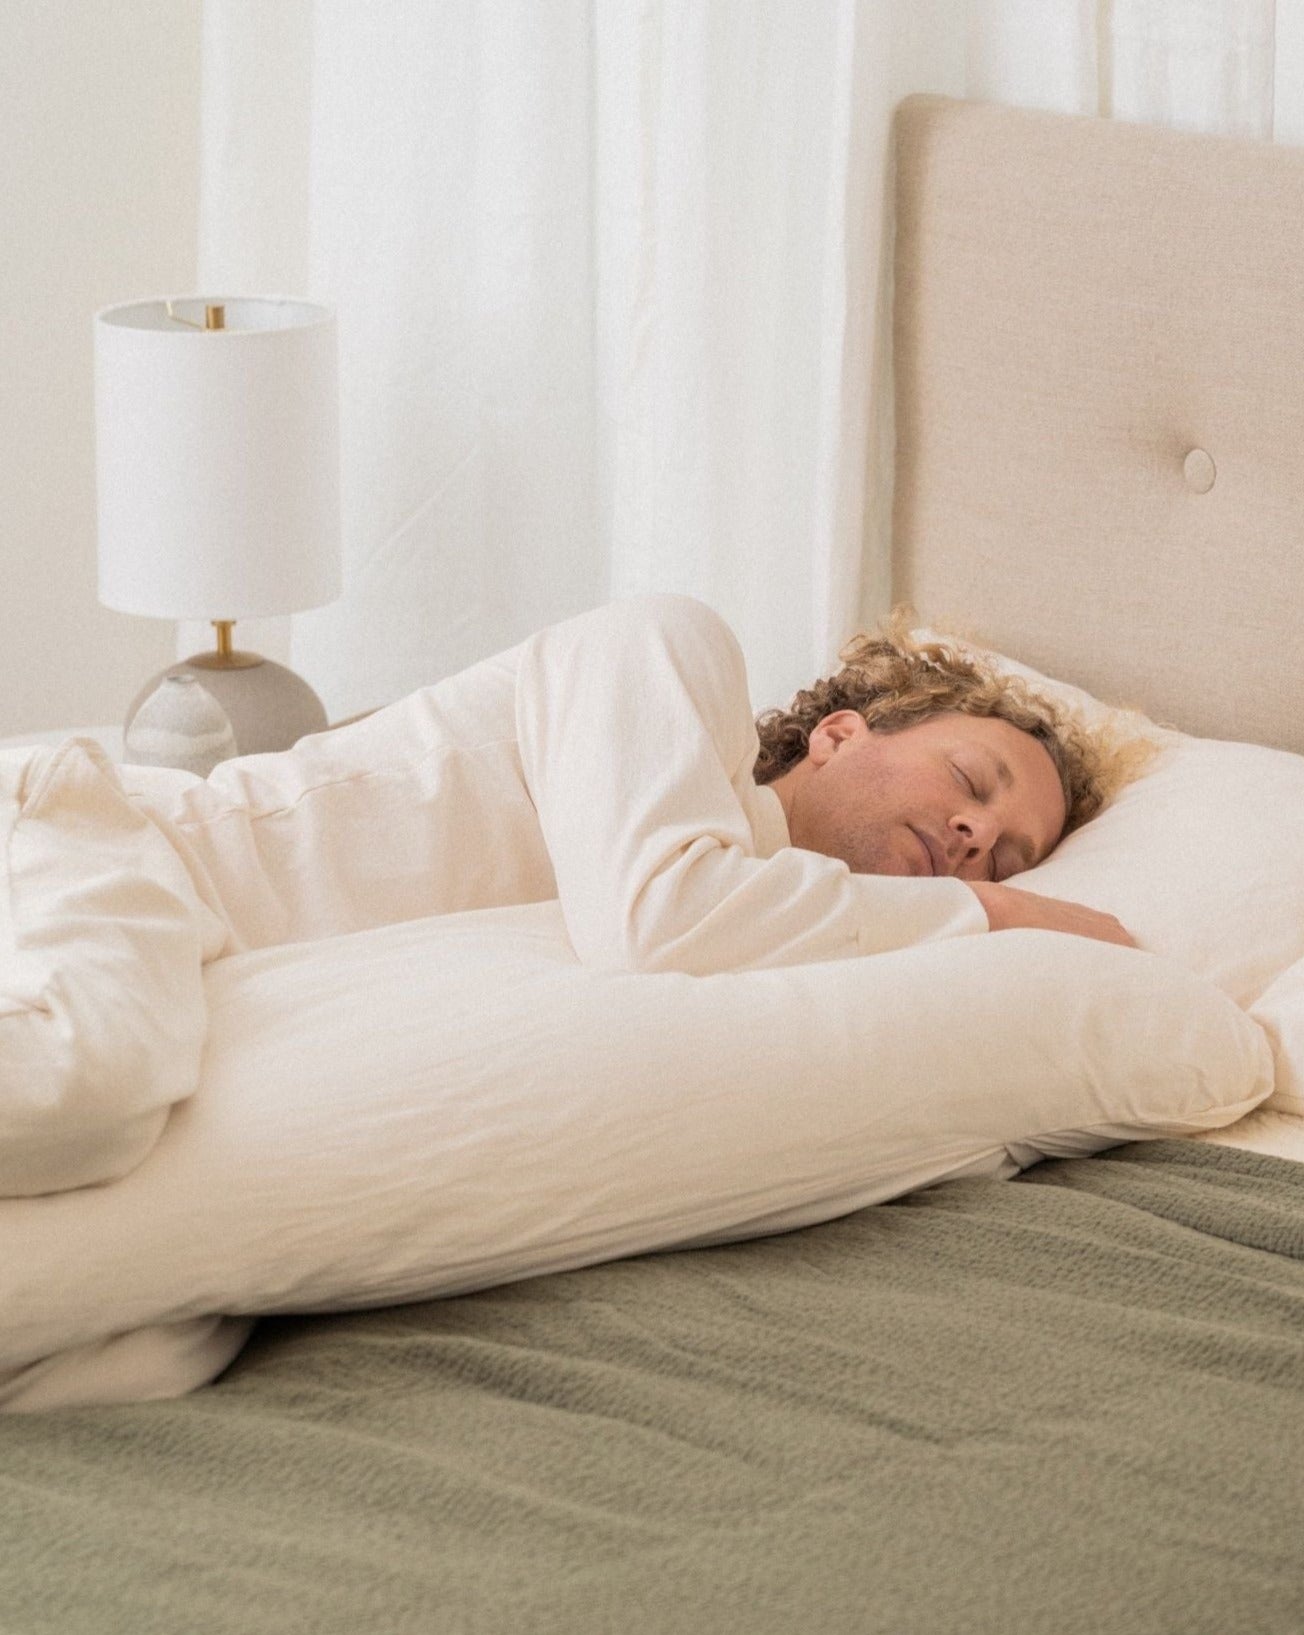 image of a man with curly hair lying on his side showing the organic body pillow supporting his top arm  for comfort and alignment